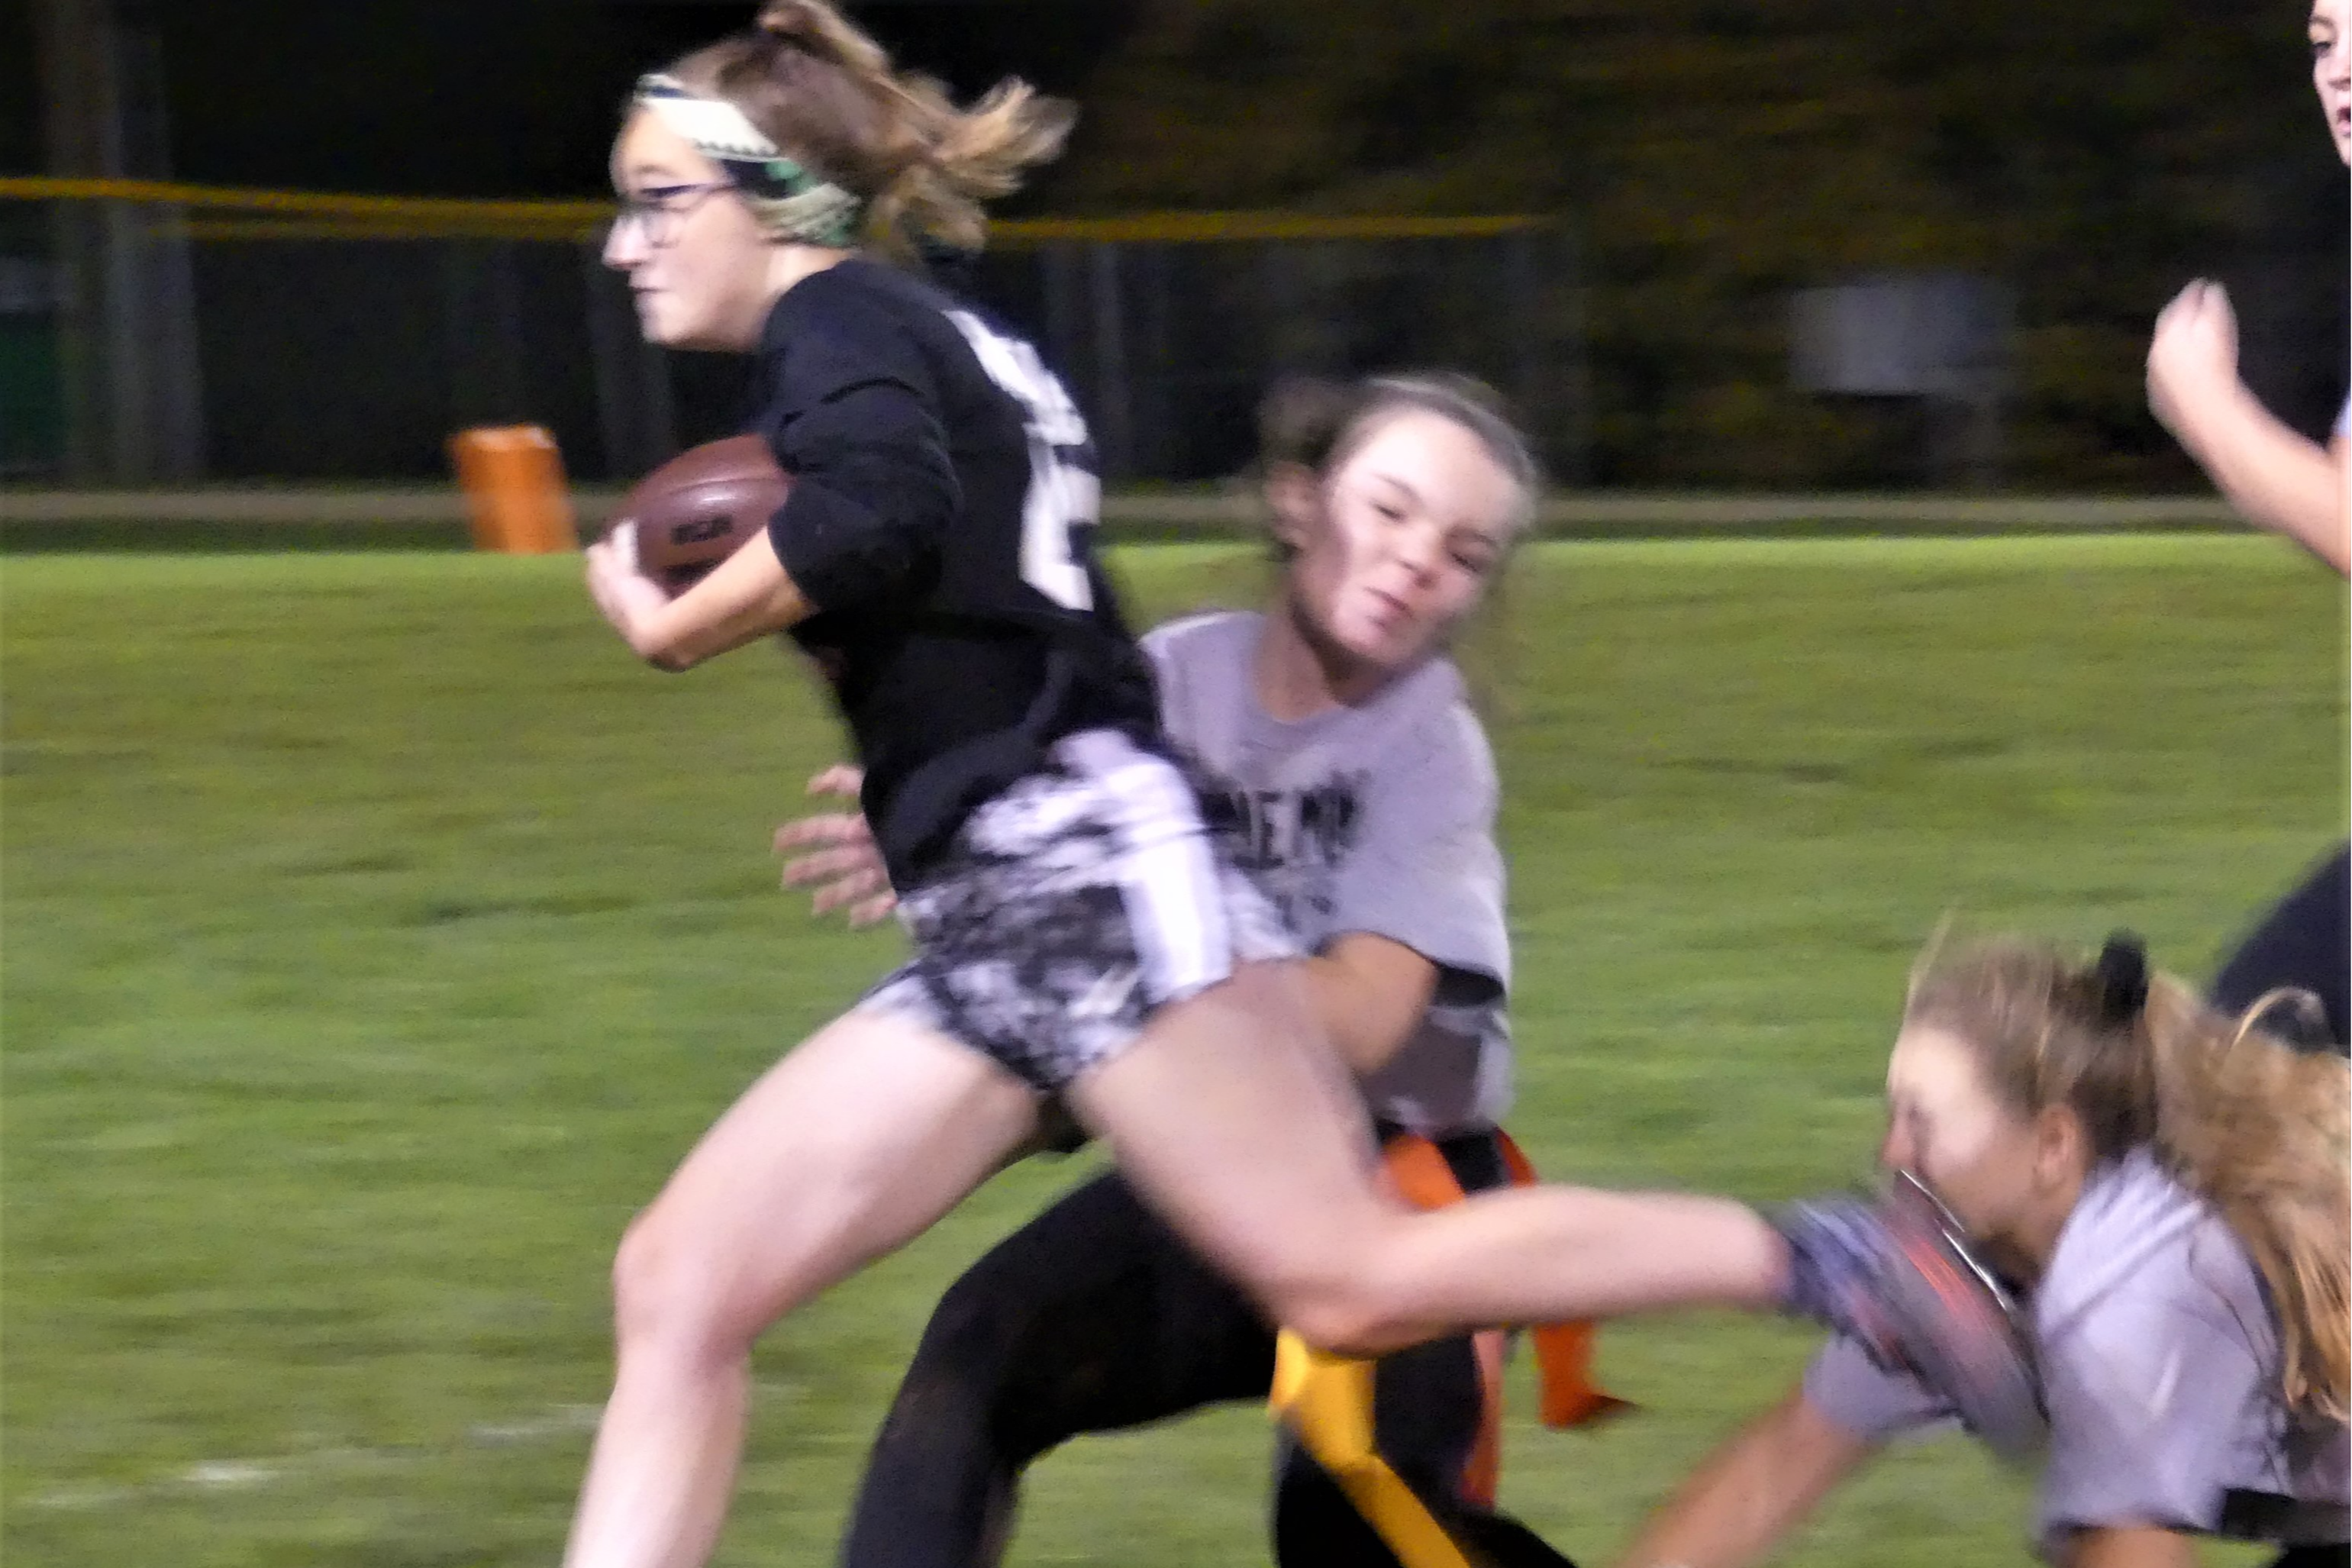 Homecoming Powder Puff Game. Team grabs for the flags of the running back. The running back's left foot makes contact with a player on the opposing team.